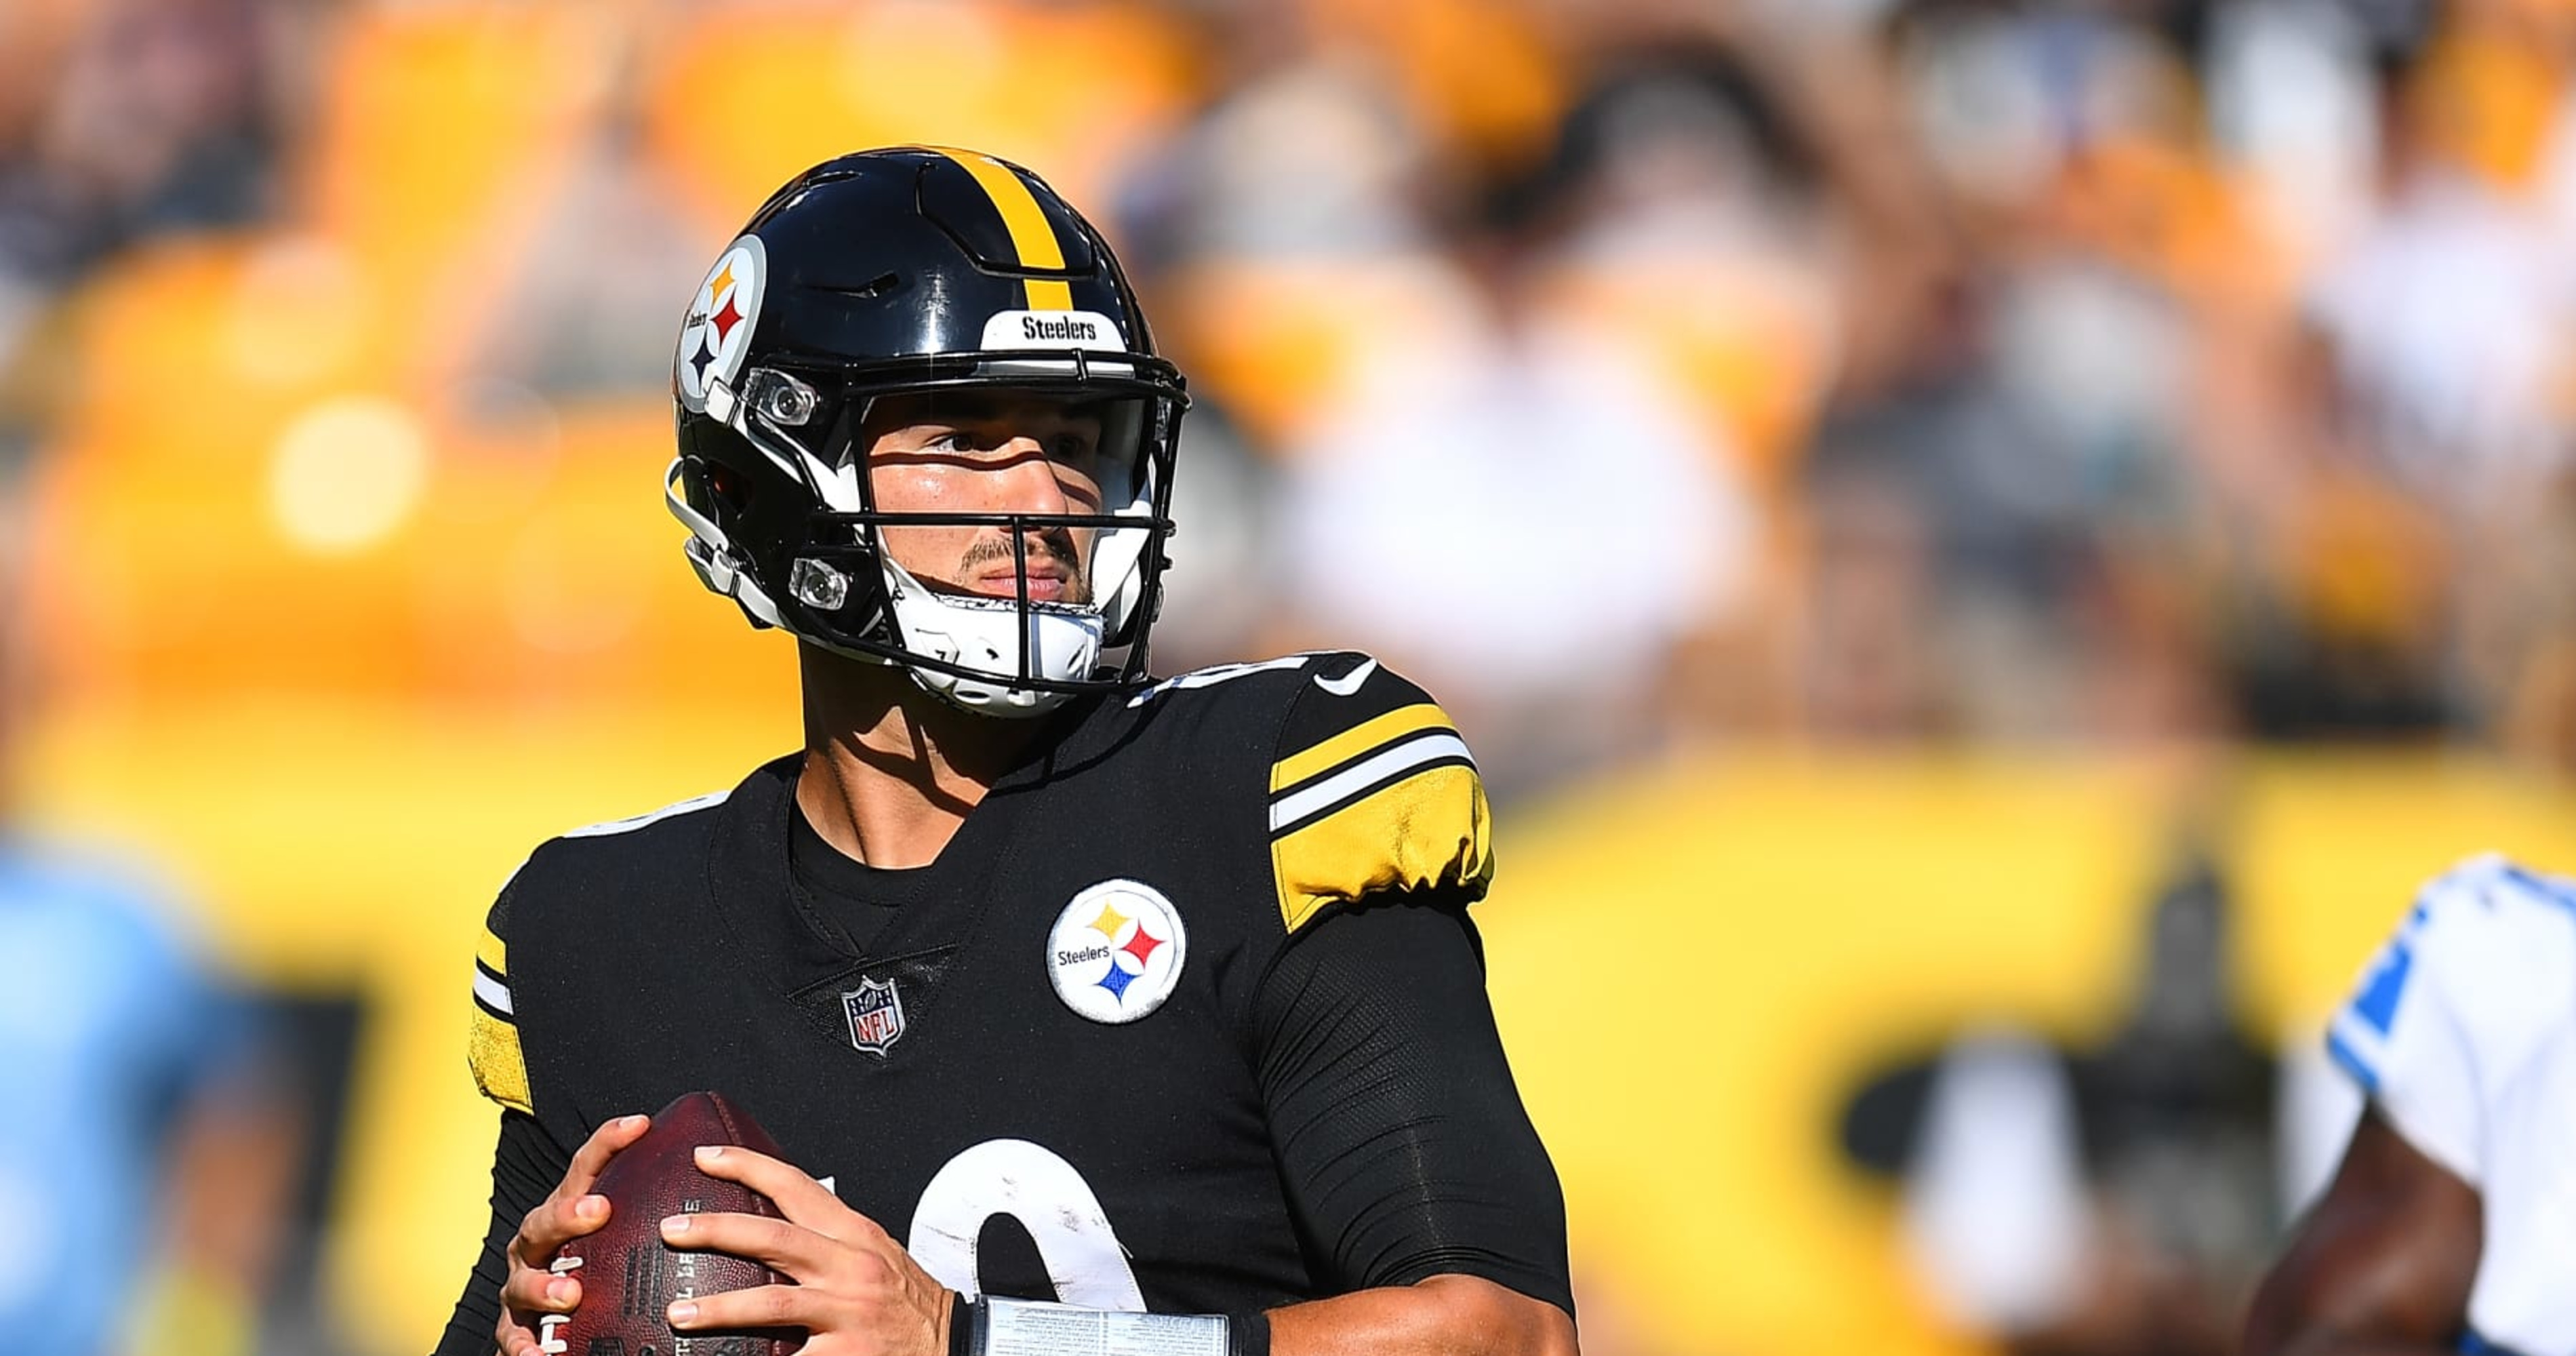 Mitchell Trubisky Named Steelers’ Starting QB over Kenny Pickett, Mason Rudolph